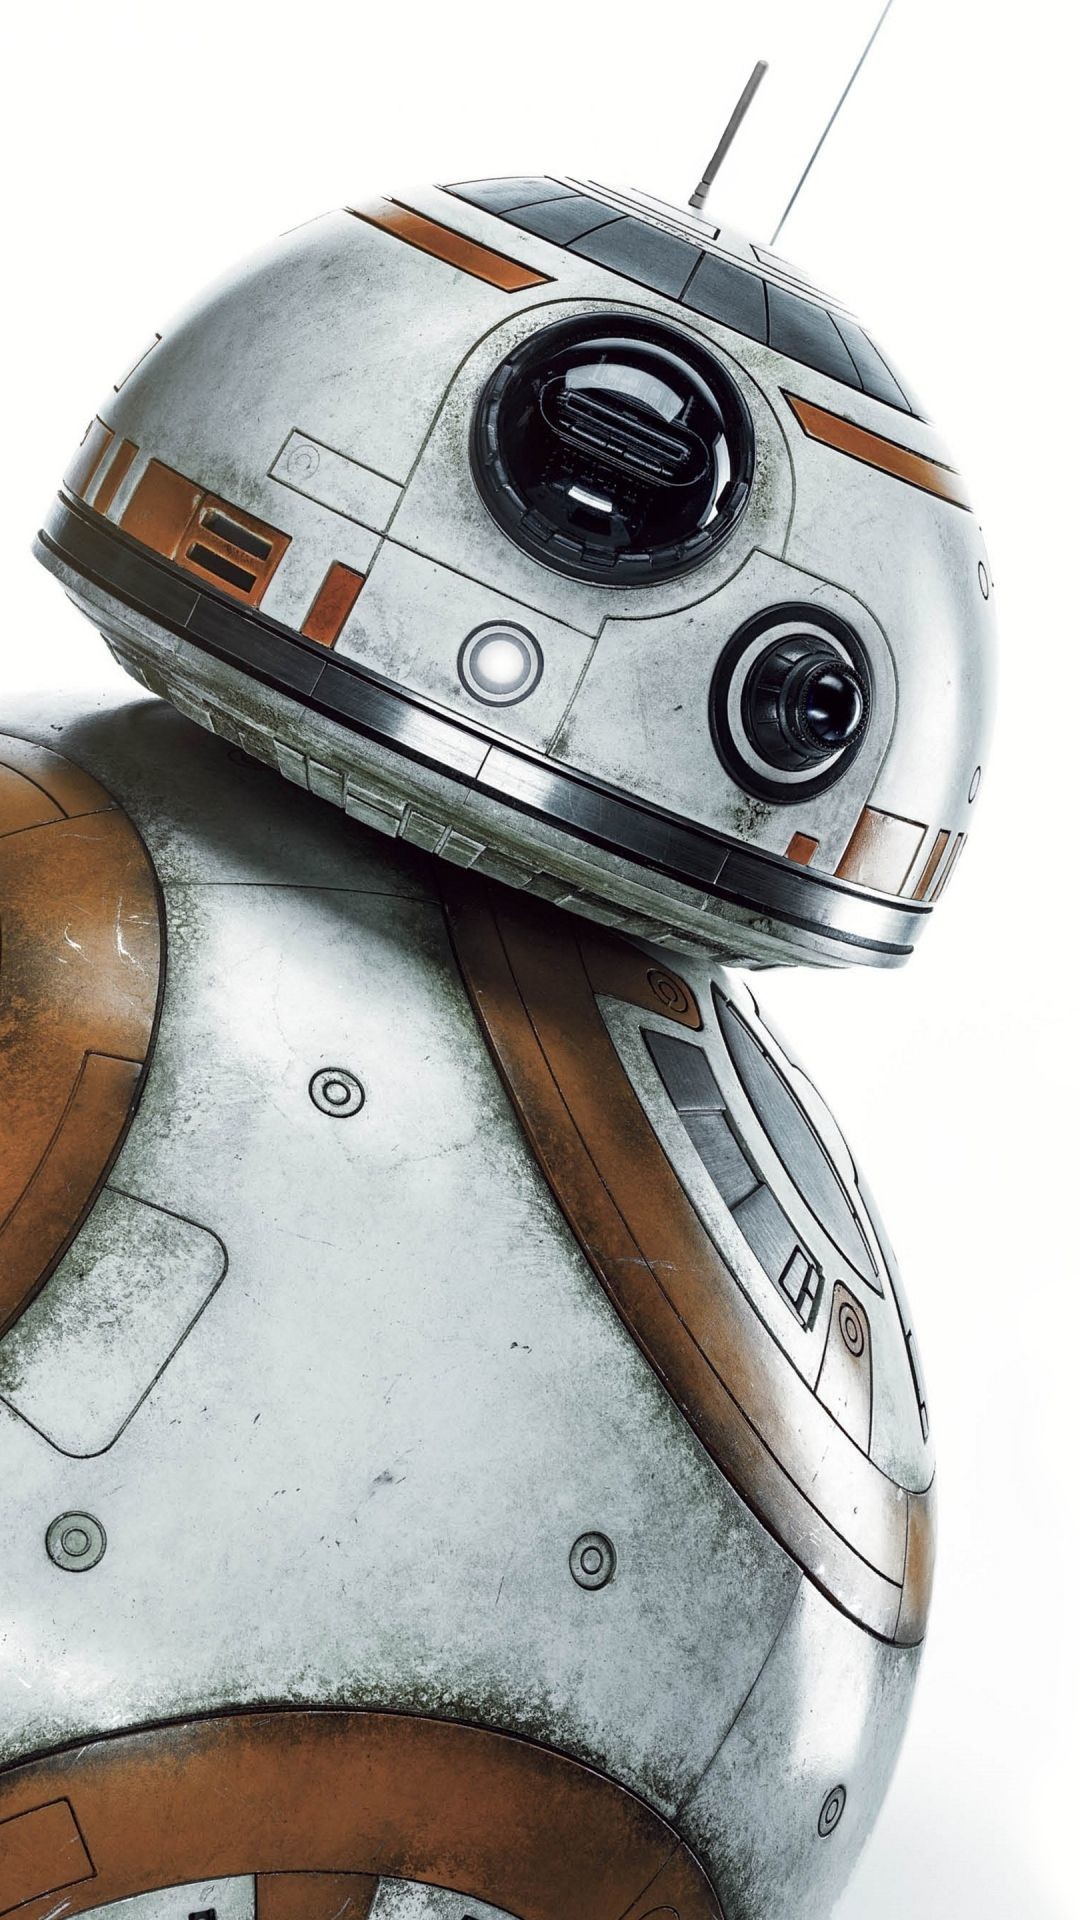 BB-8 Droid Star Wars Movie Android Wallpaper …